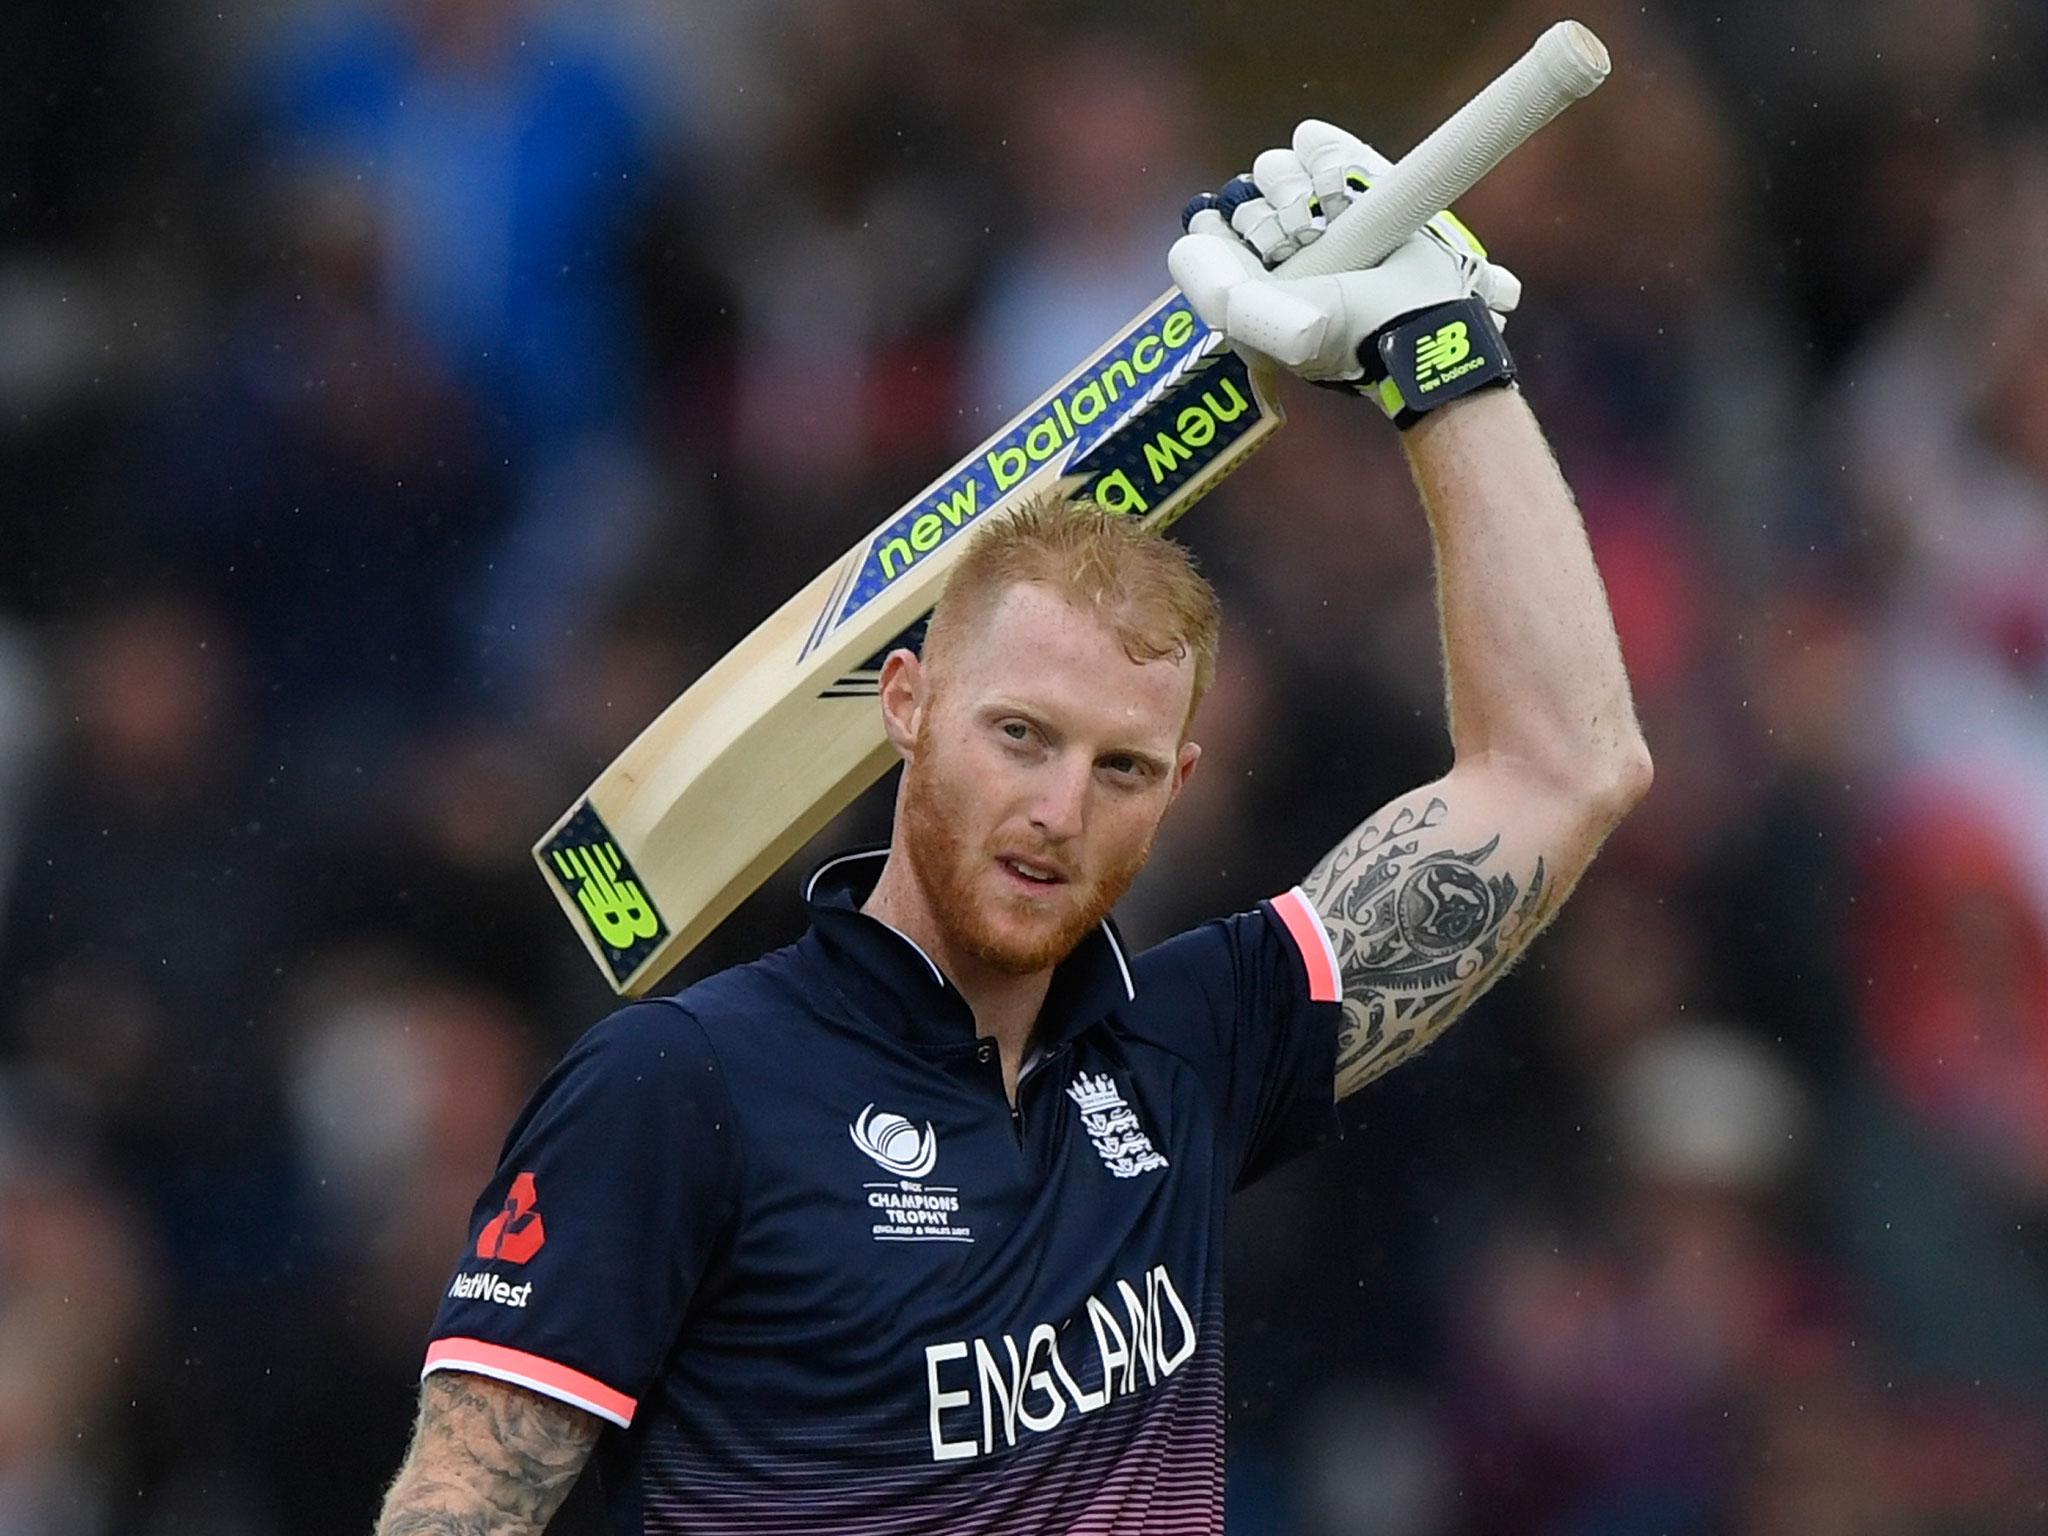 Ben Stokes' brilliance earned England the win and sent Australia crashing out